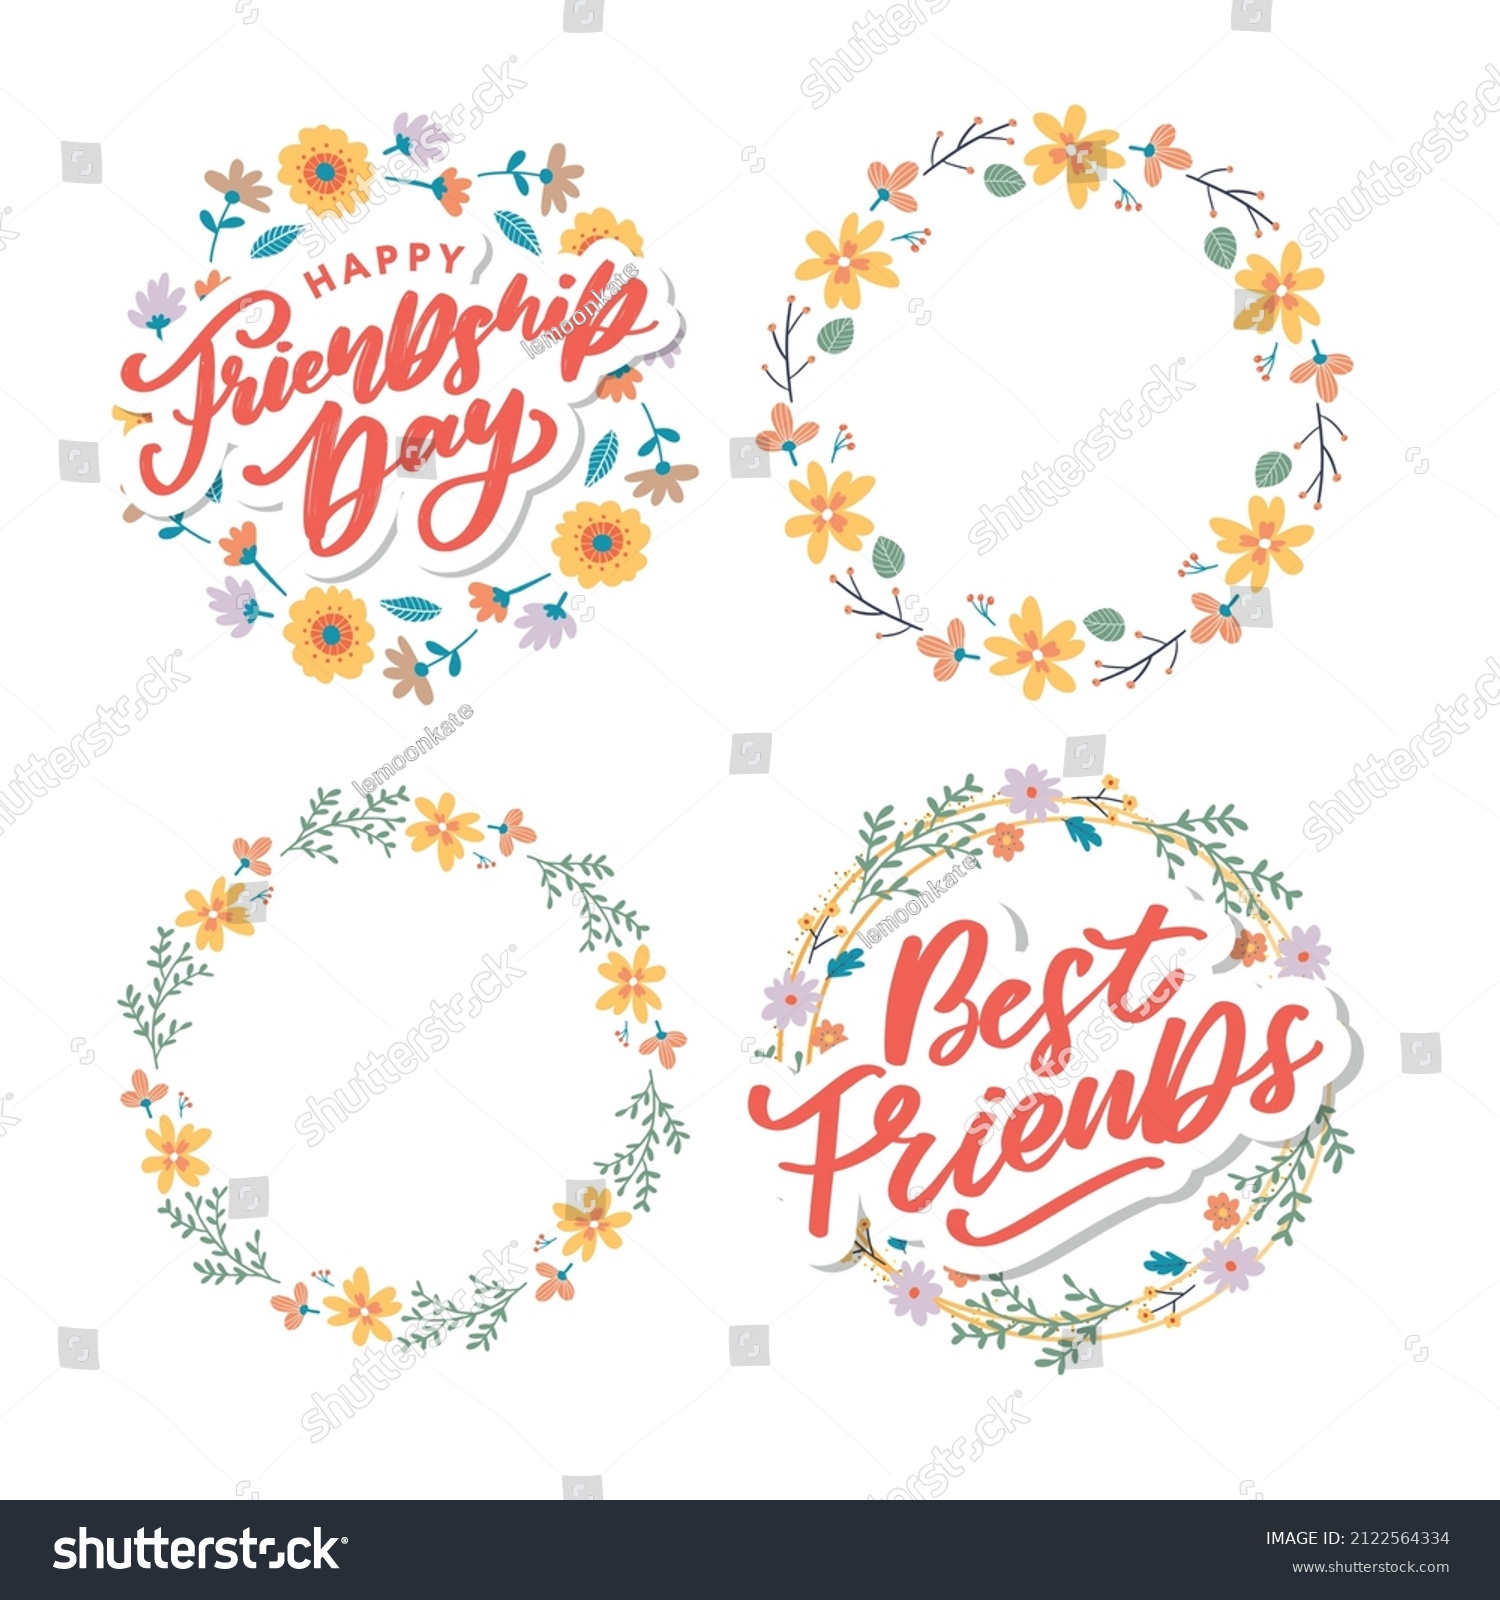 SVG of Best Friend Forever Friendship Day soul sister with heart lettering design best friend forever bff besties svg